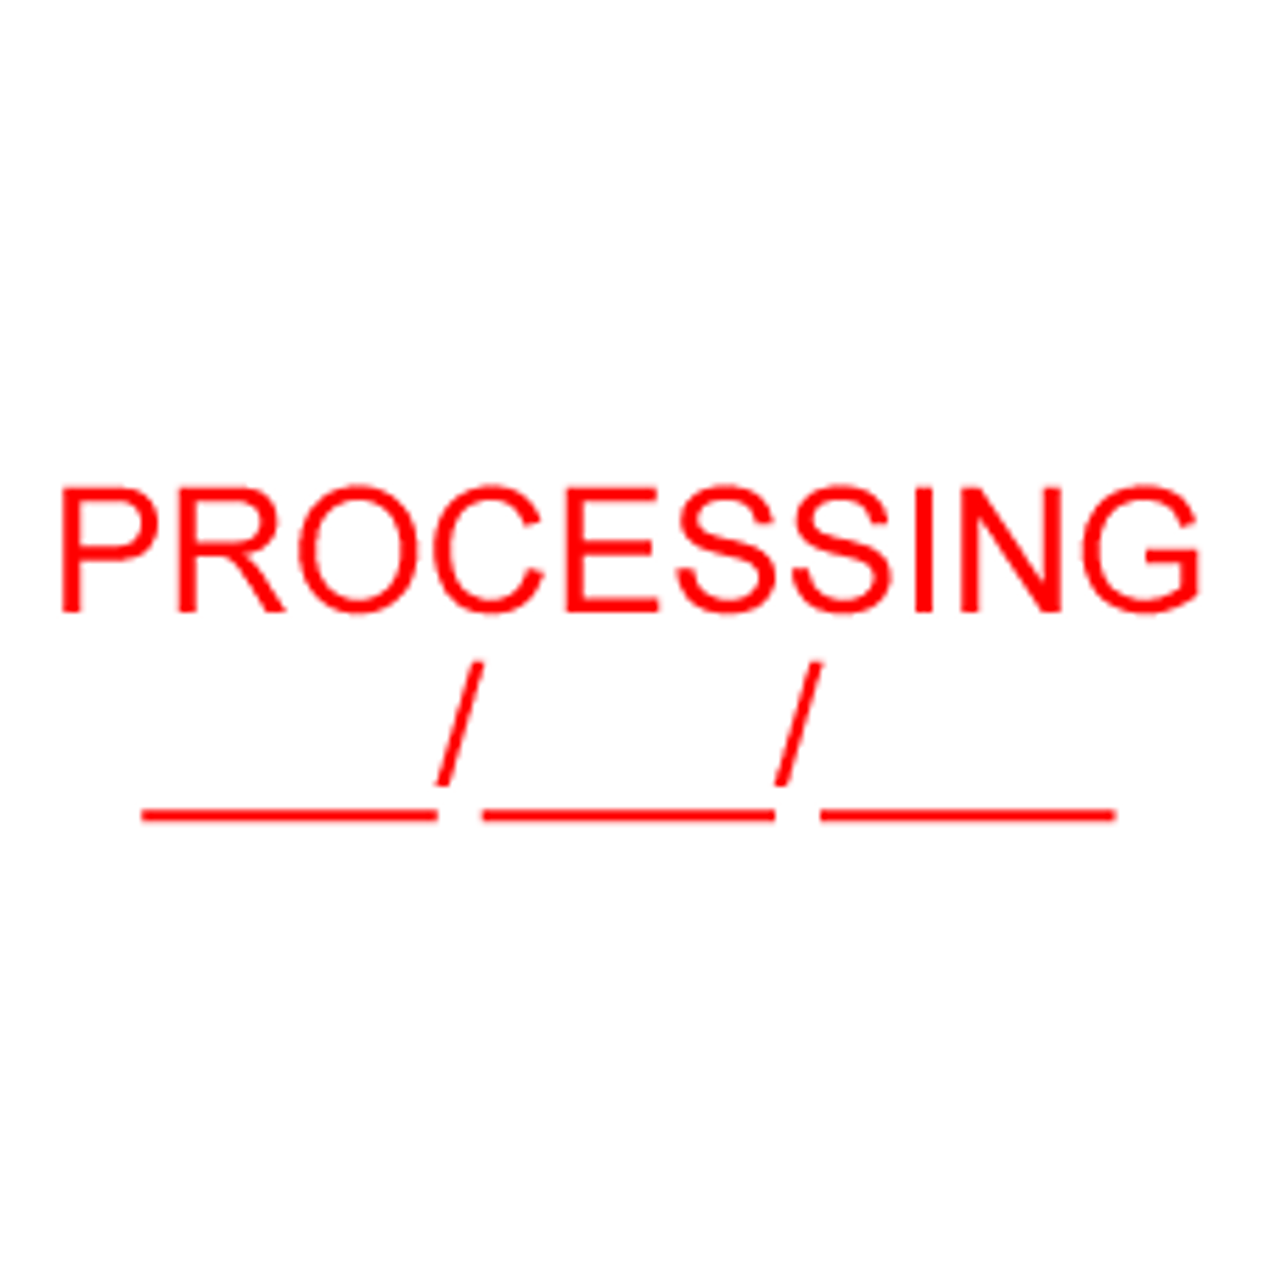 PROCESSING w/ date line Rubber Stamp for office use self-inking